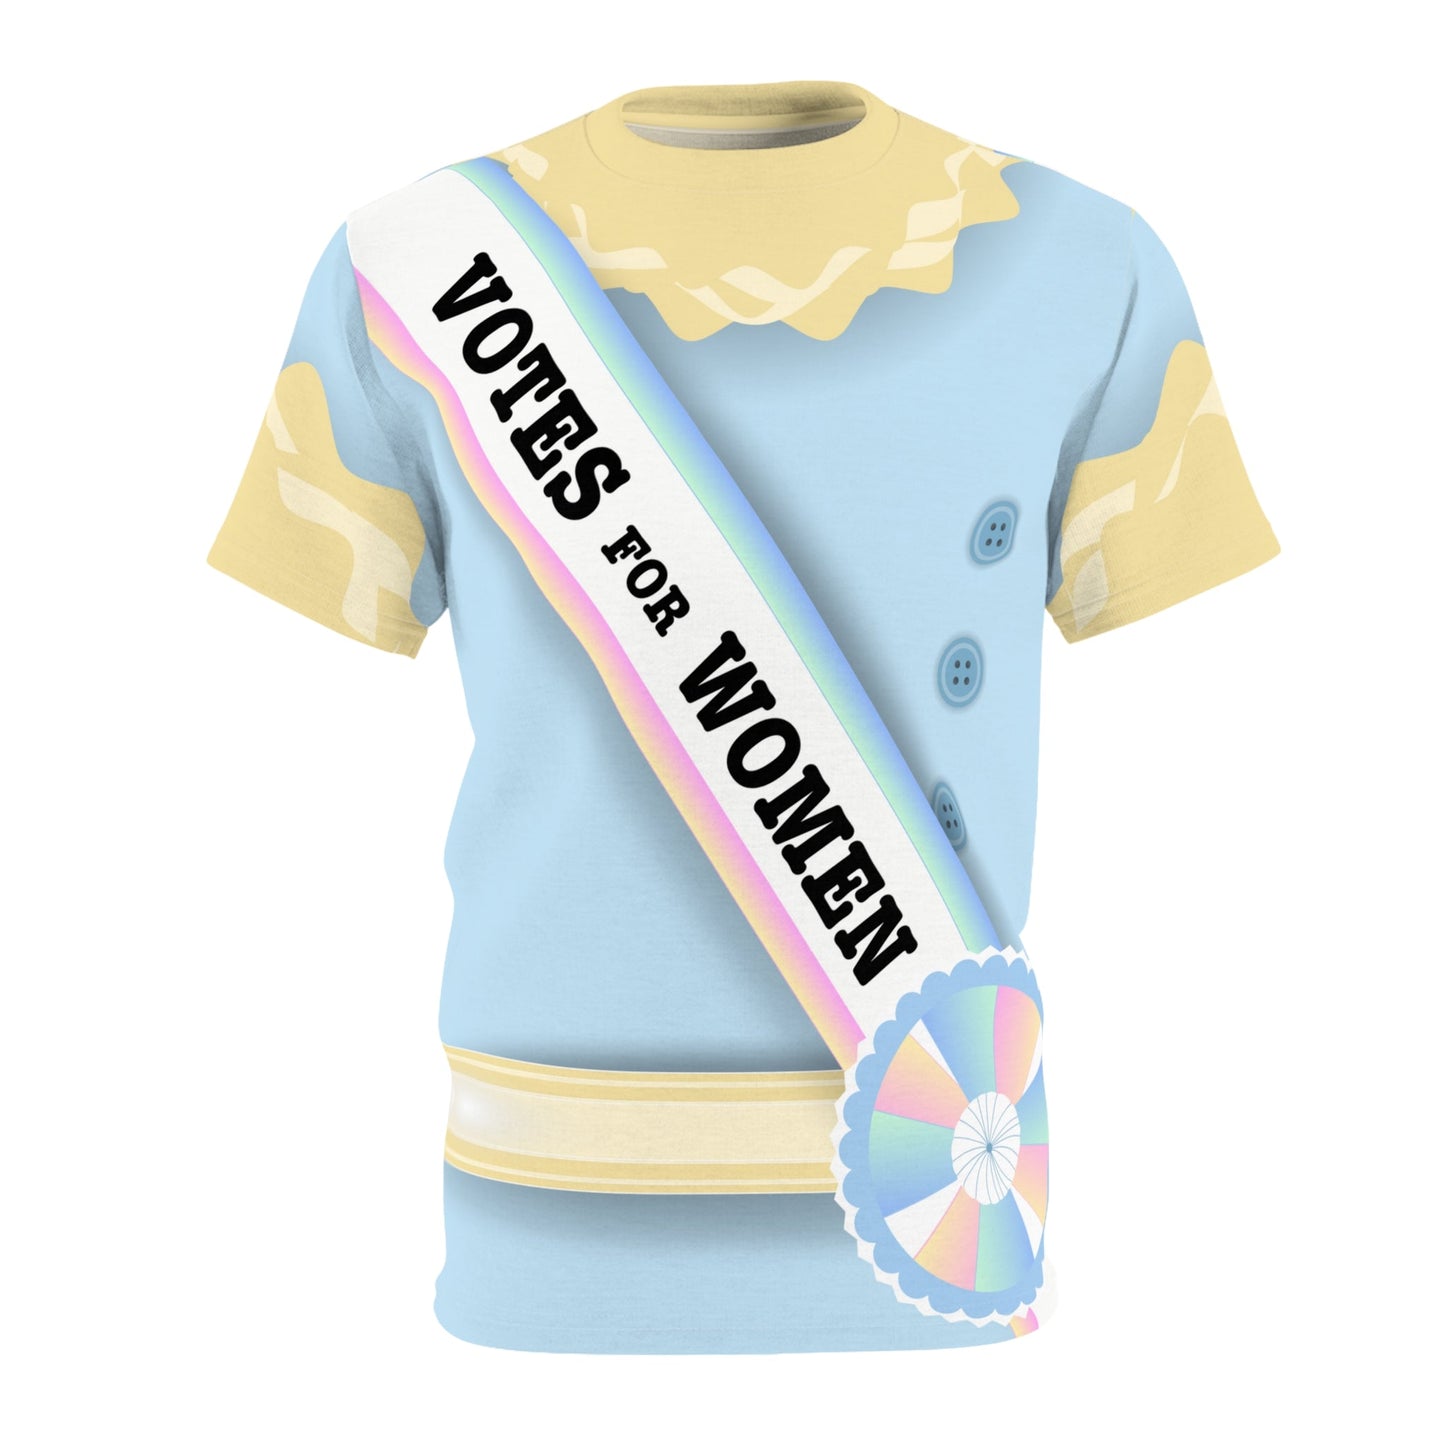 Suffrage Rights Unisex Tee active wearAll Over PrintAOP Clothing#tag4##tag5##tag6#